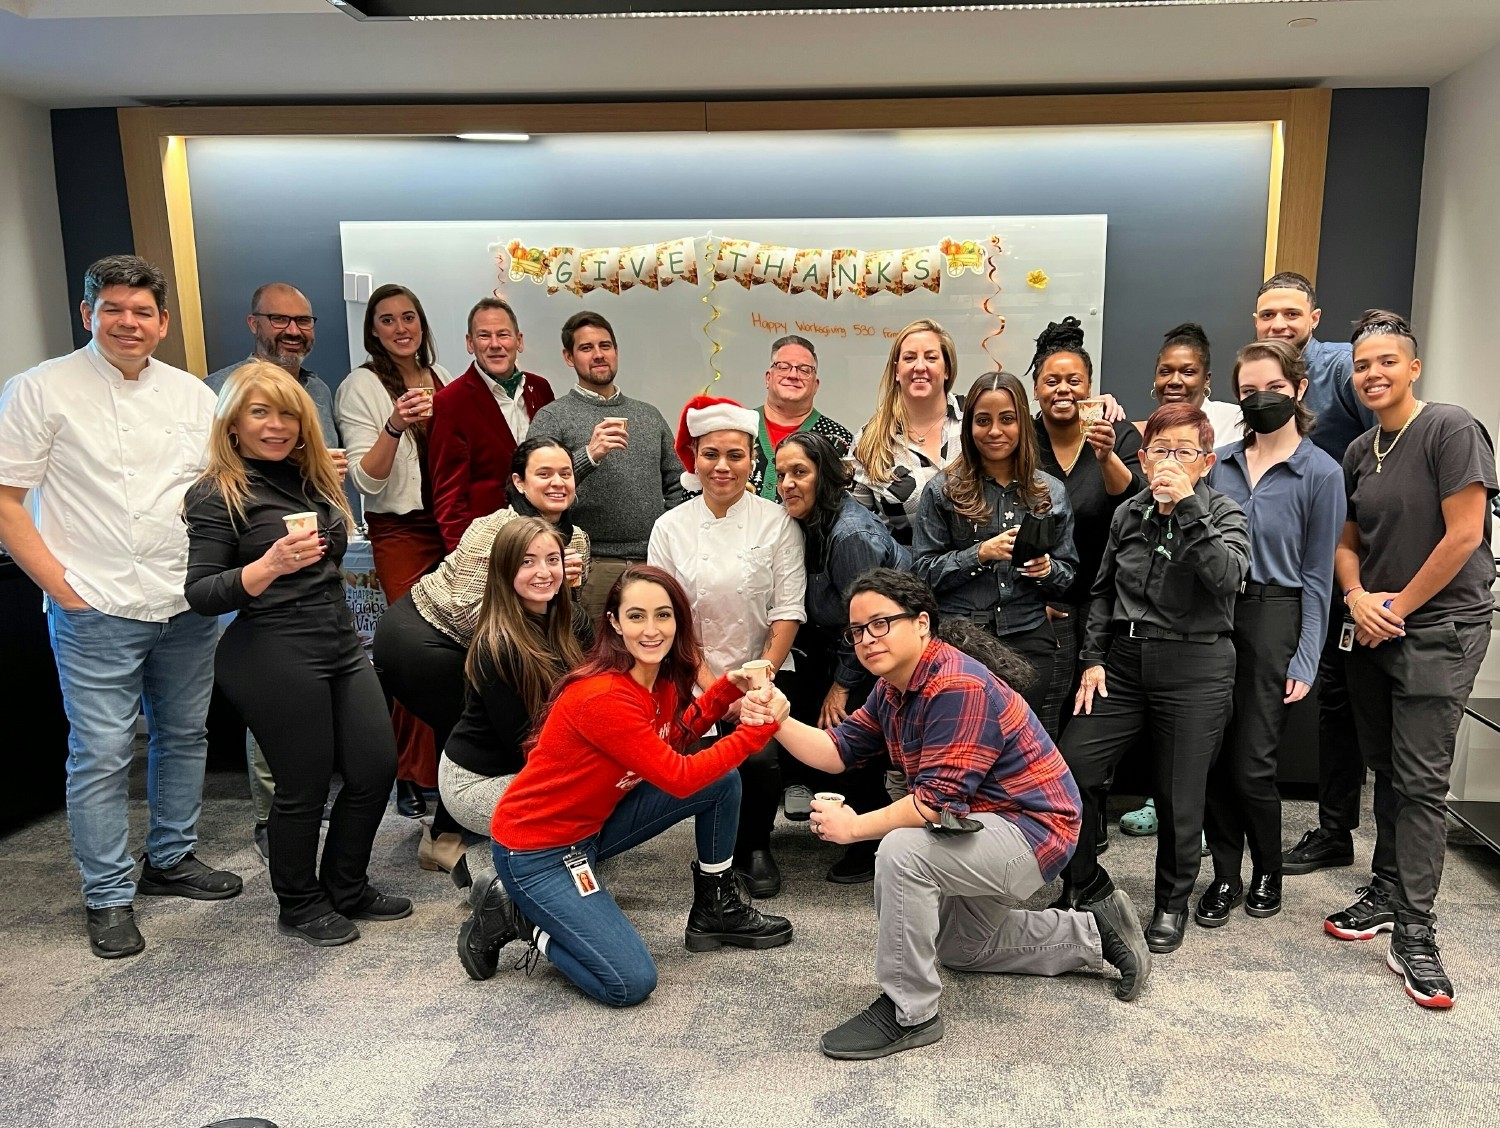 Convene's NYC team giving thanks with a holiday potluck meal together